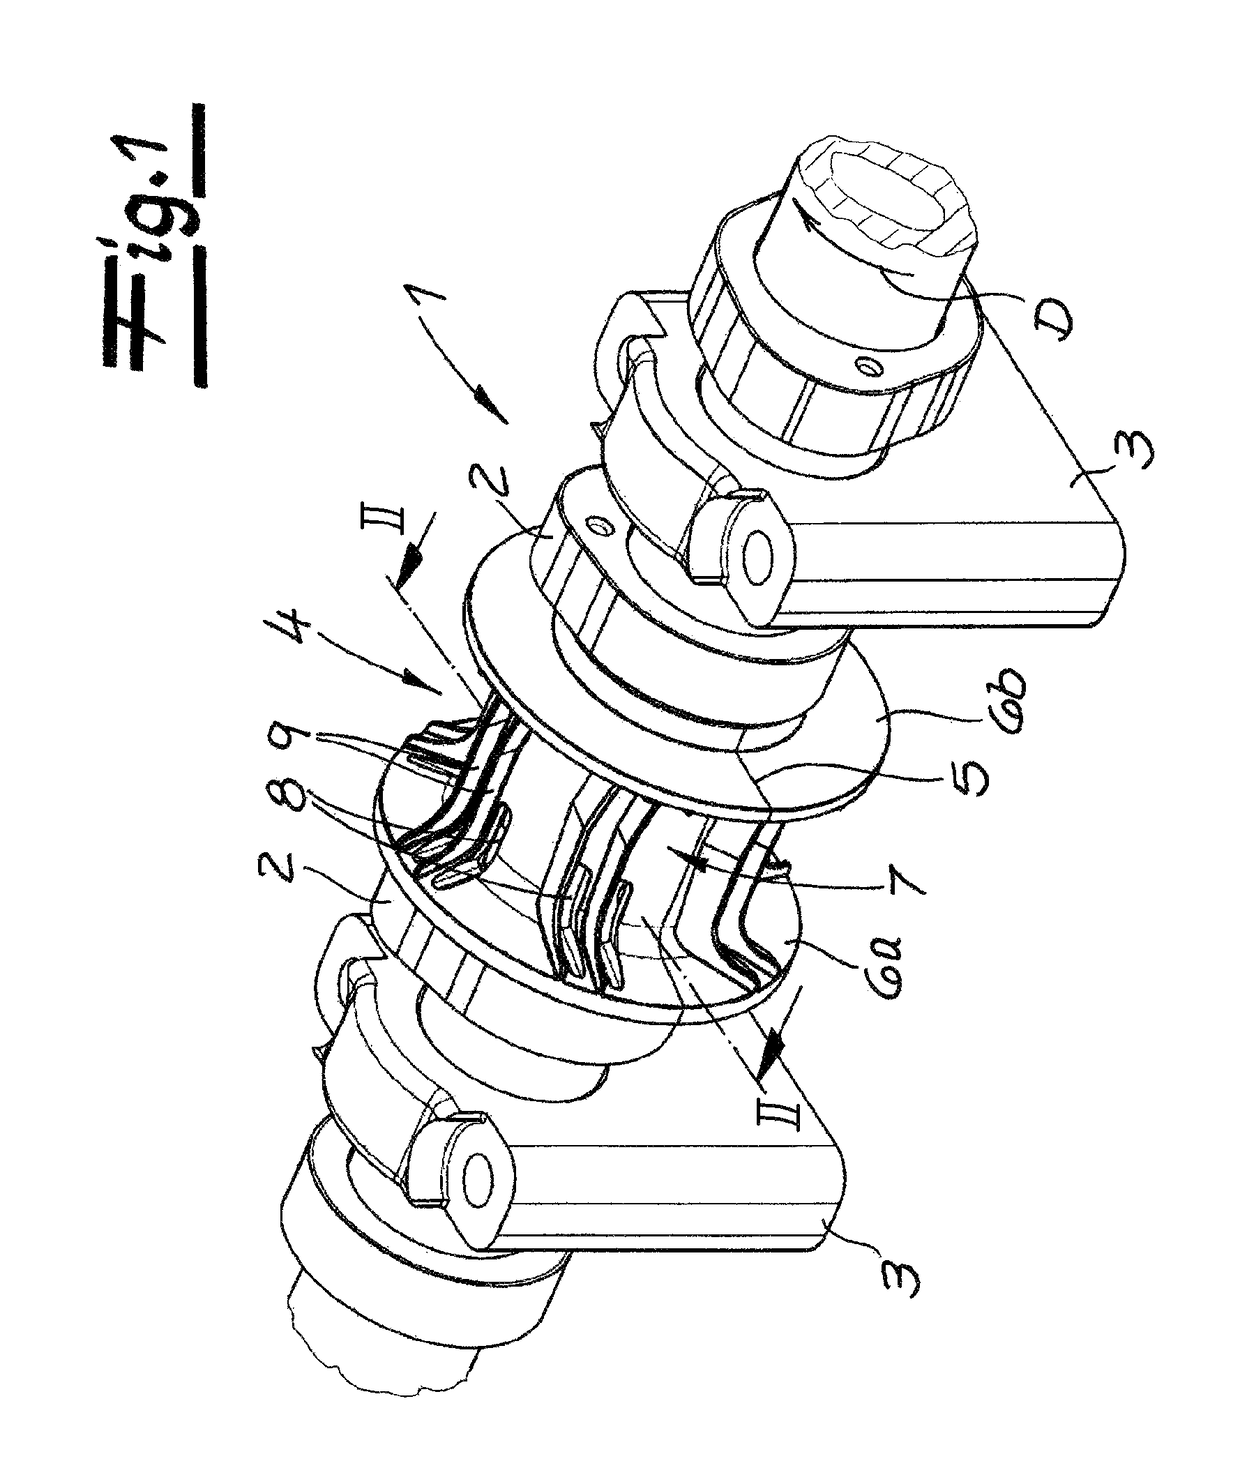 Shaft, particularly a partly tubular camshaft